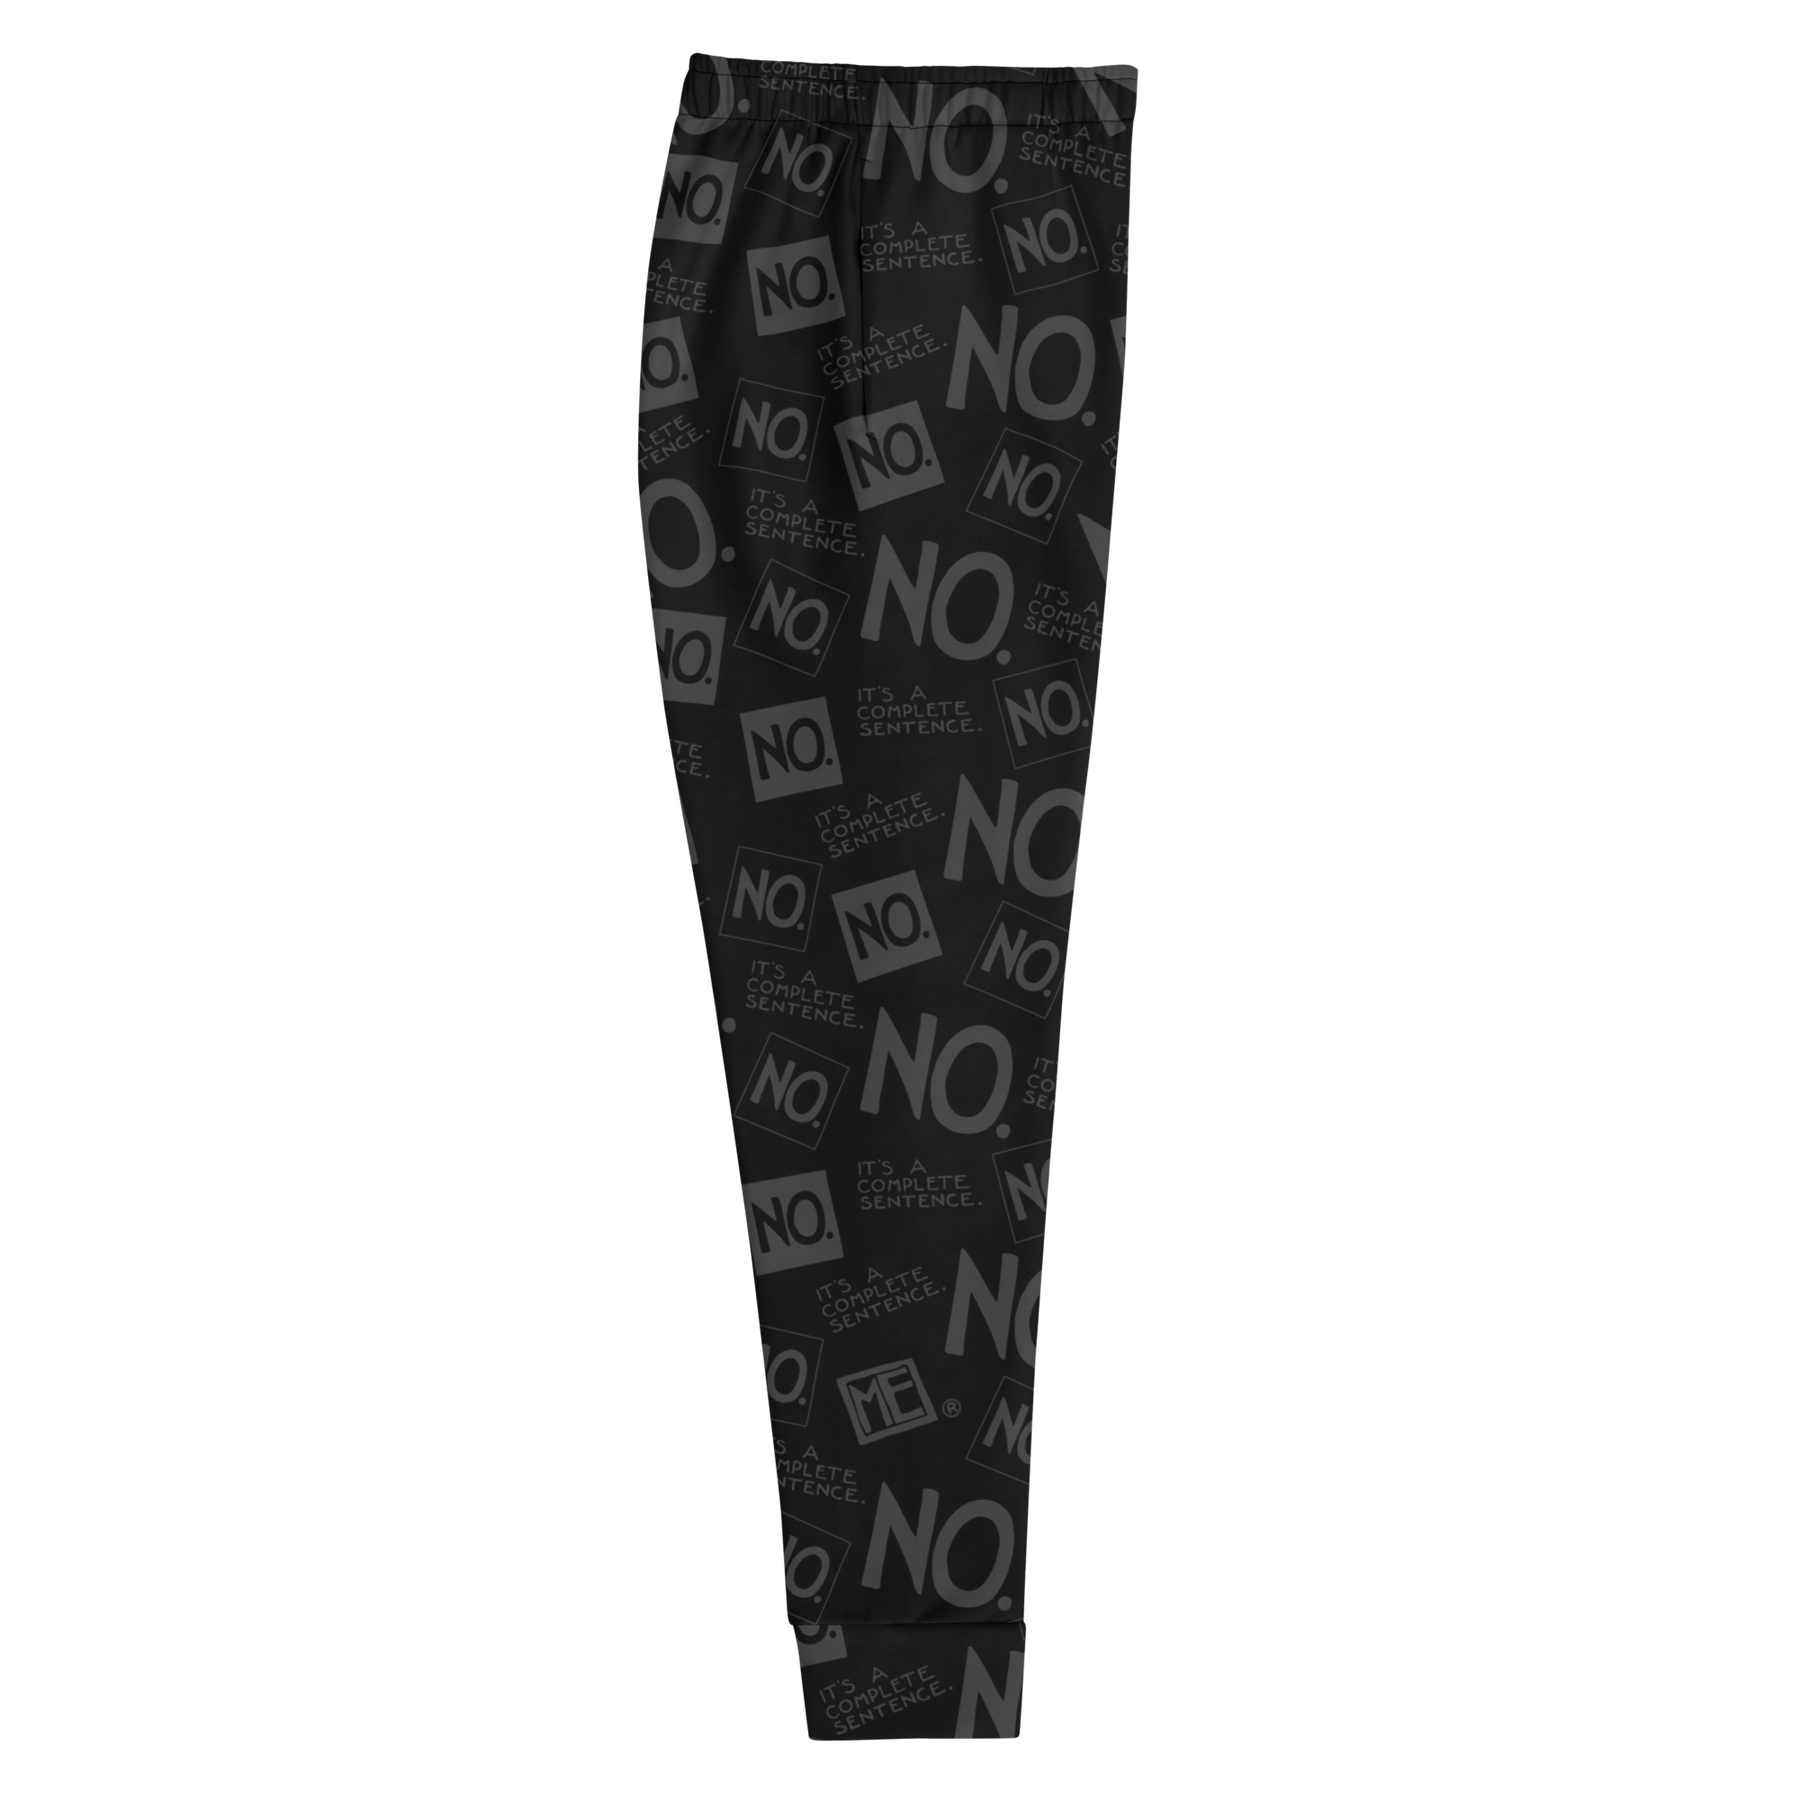 Complete Sentence Charcoal Women's Joggers